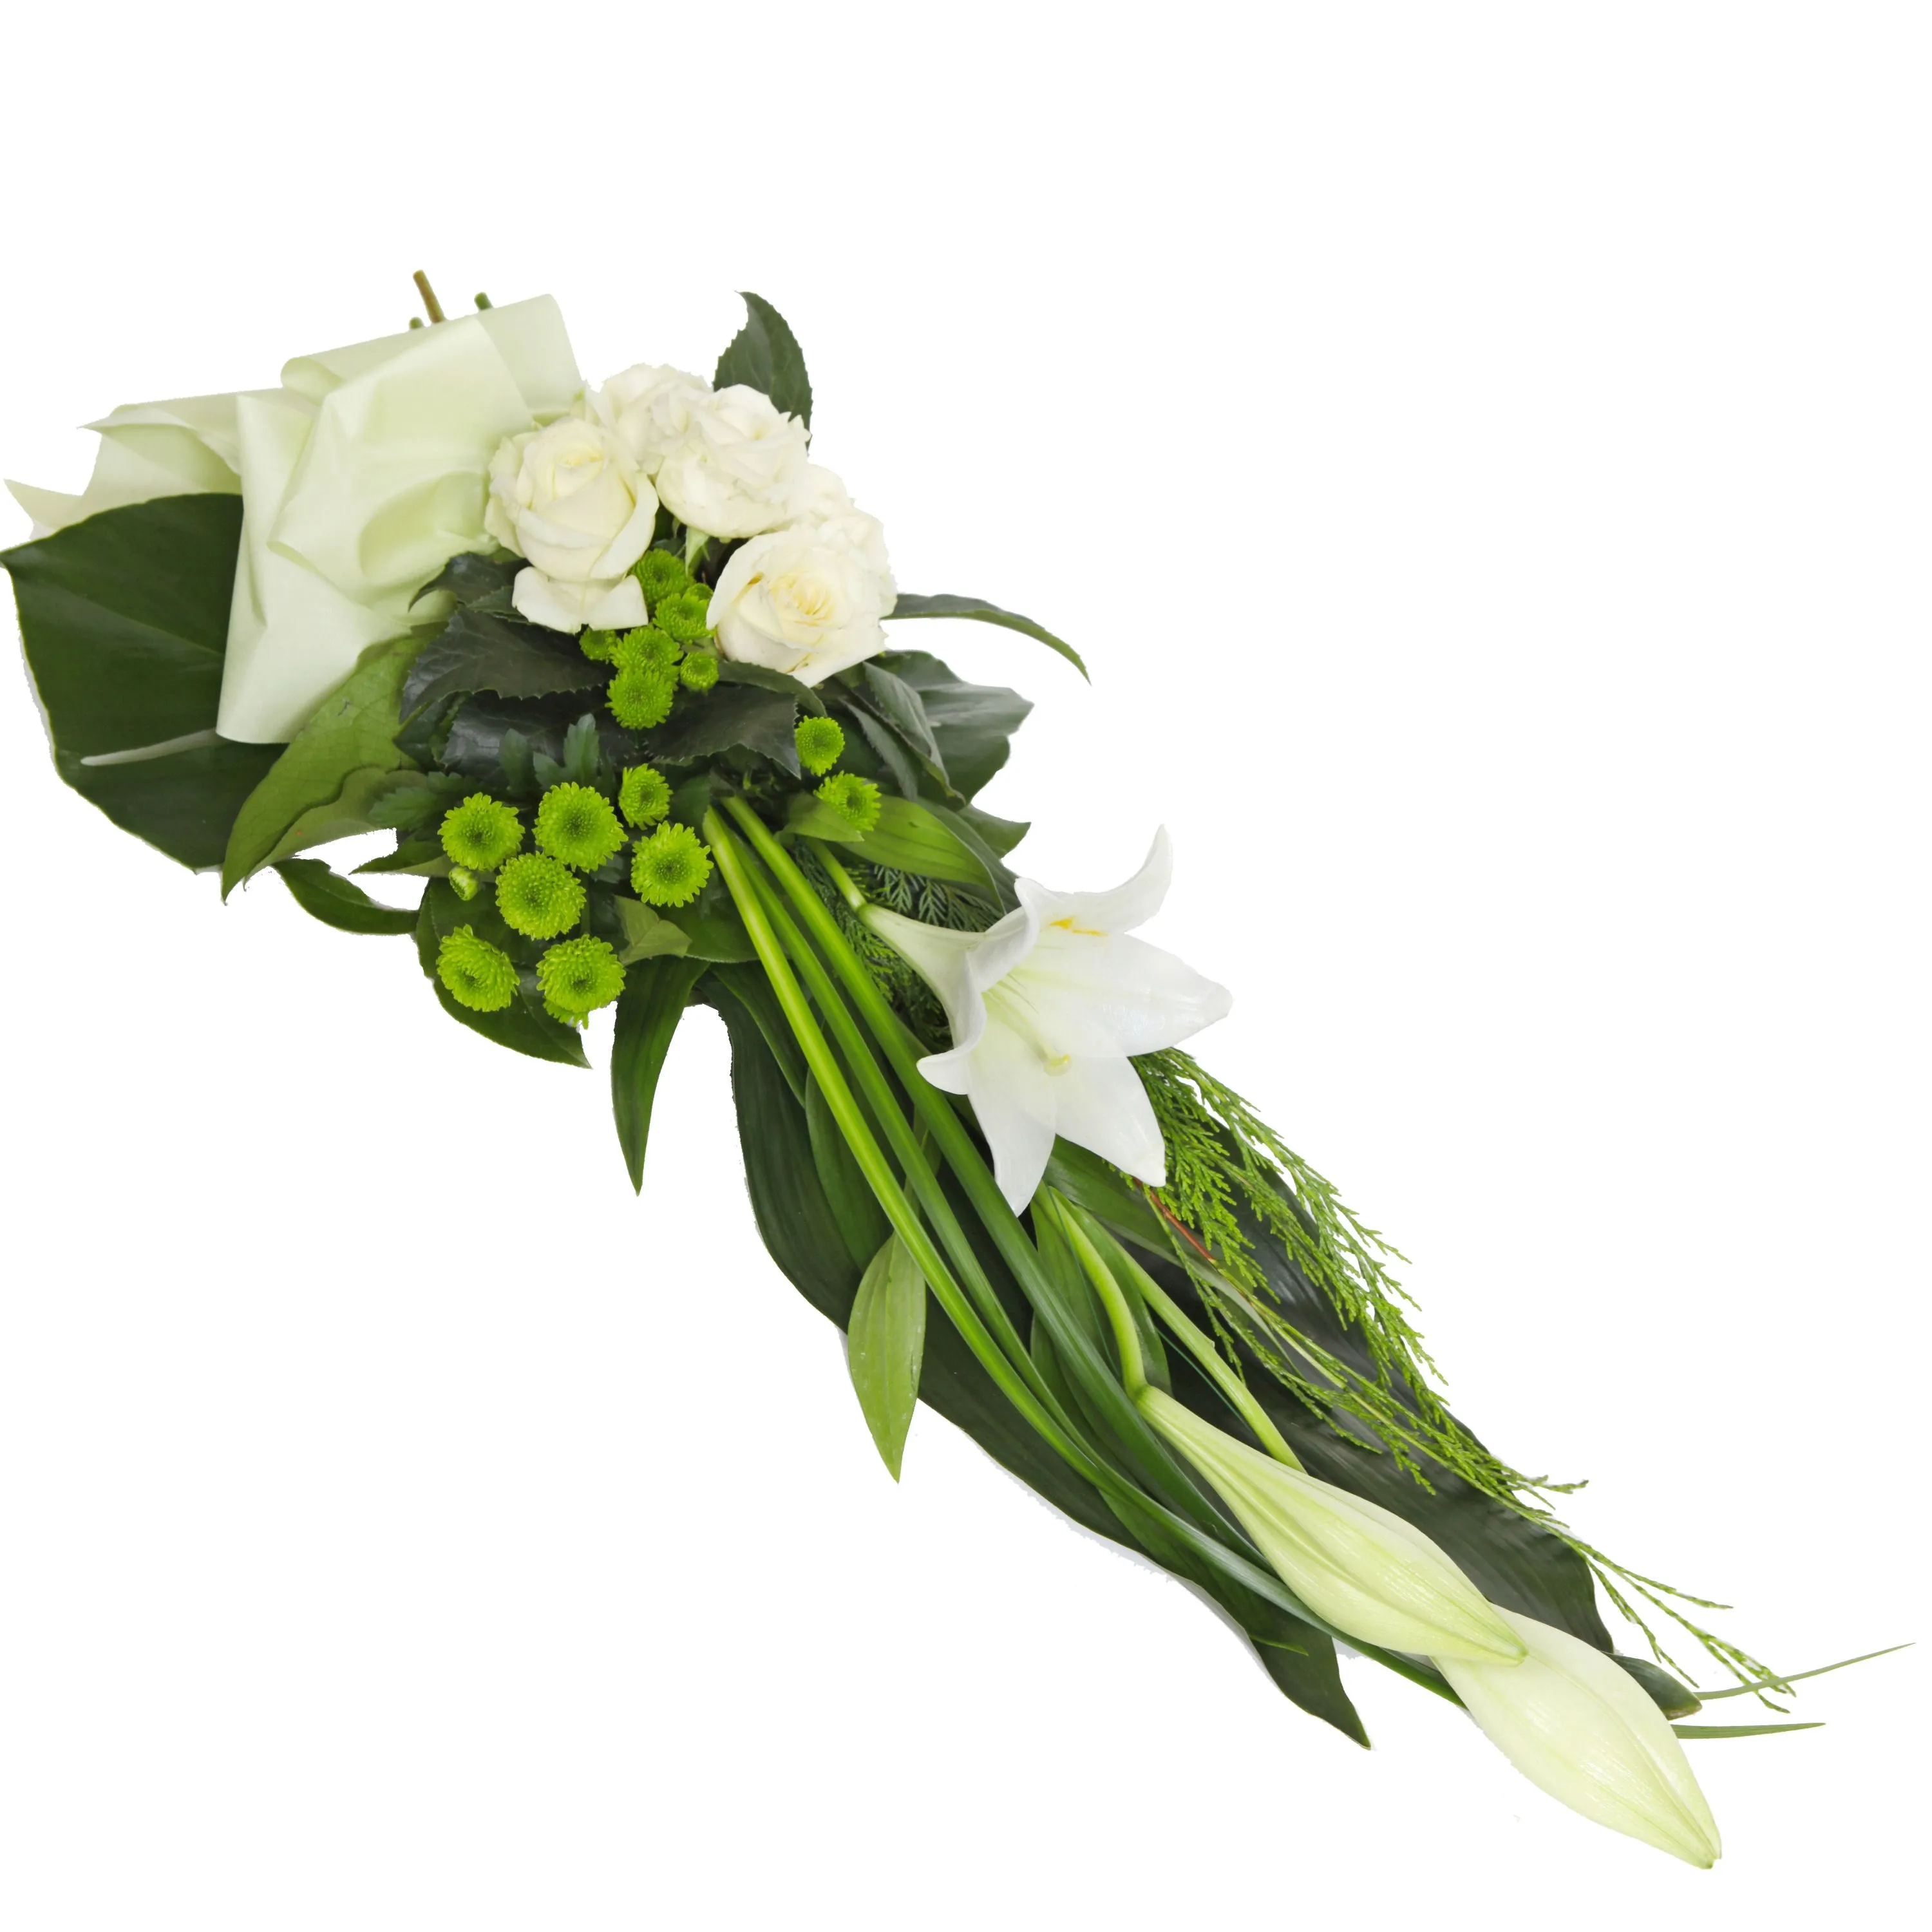 Modern funeral spray of white lilies - Finland